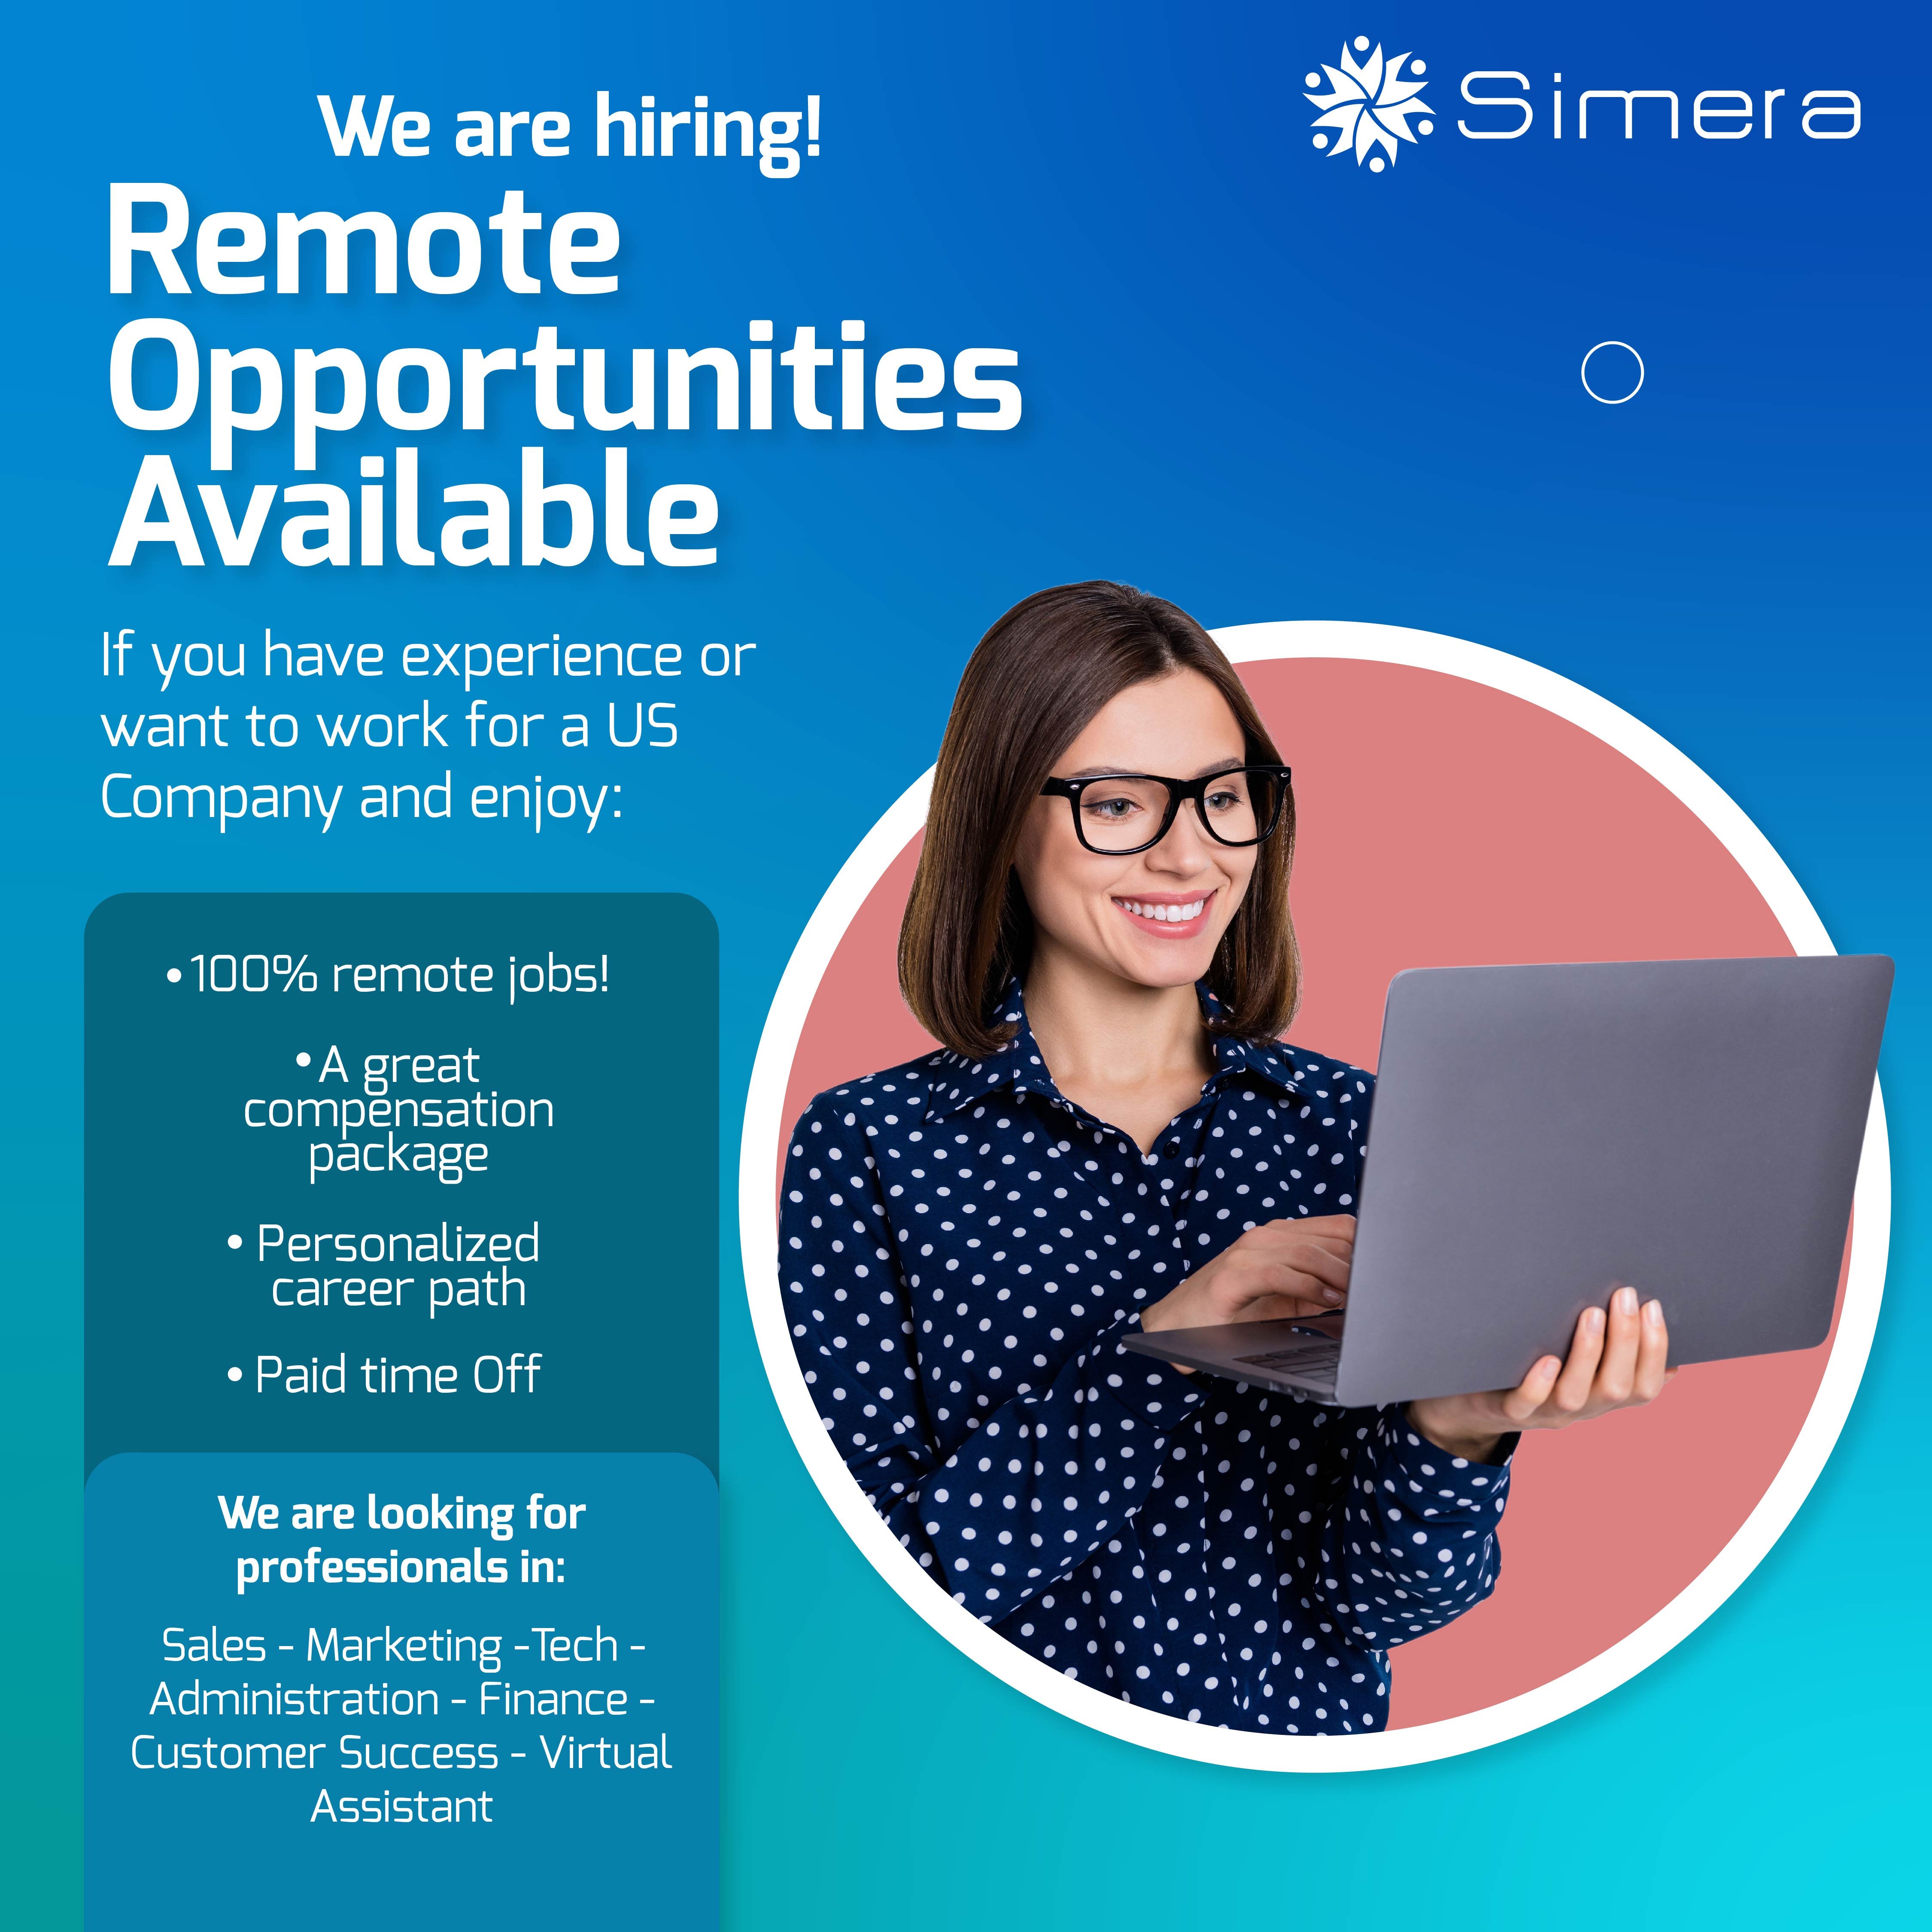 Simera's hiring process is fairly easy. Apply today to start working remotely!